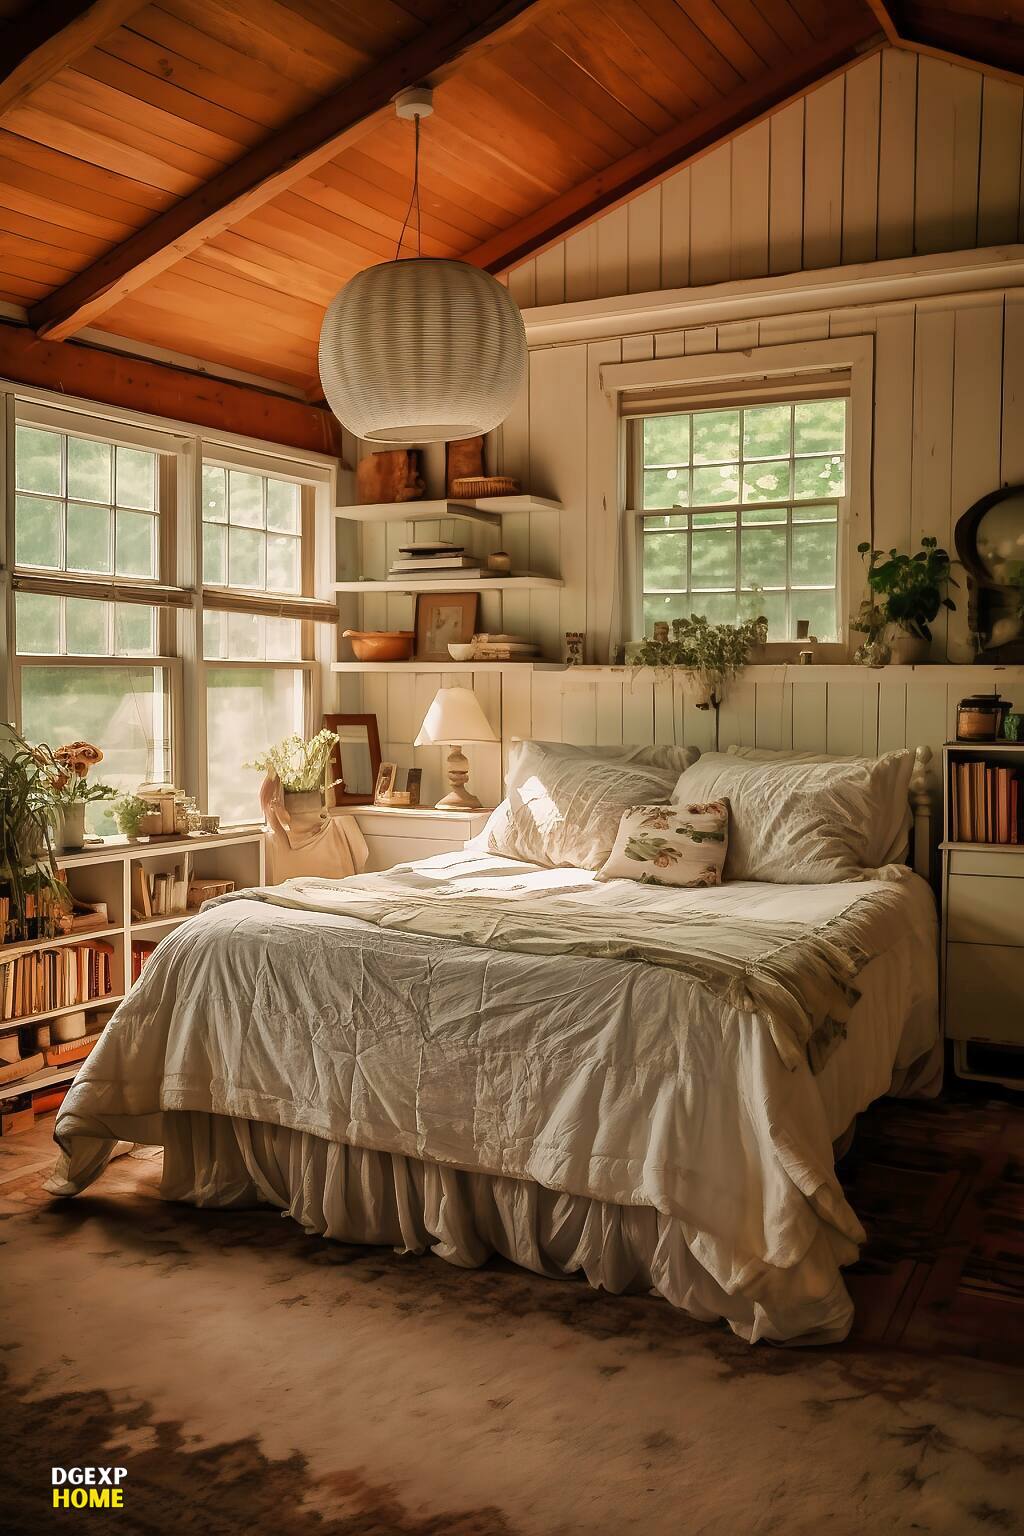 Cottagecore Farmhouse Bedroom With White-Paneled Walls, Wooden Beams, And Cozy Cottage Decor